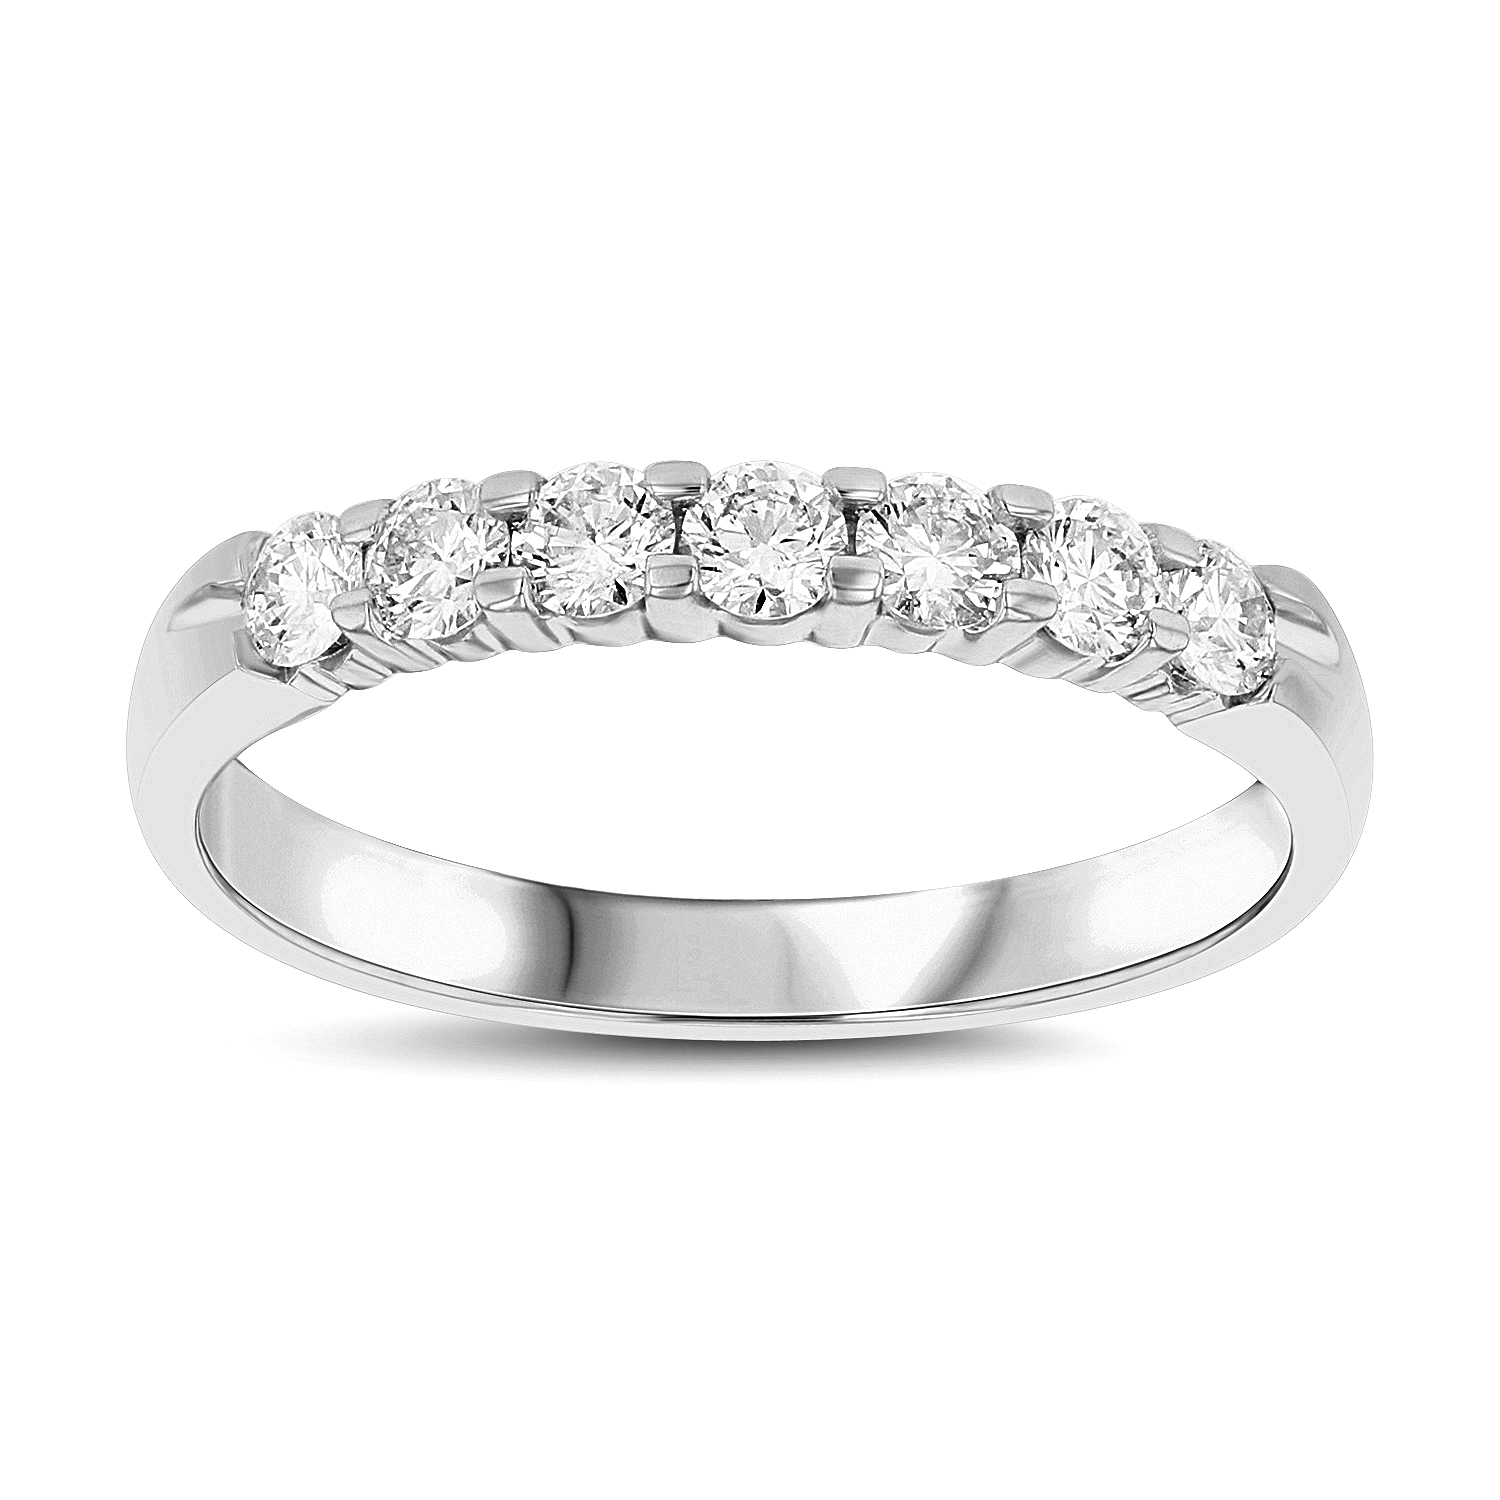 View 0.50ct tw 7 Stone Round Diamonds Shared Prong Anniversary or Wedding Band 14k Gold Bridal Ring H-J, SI